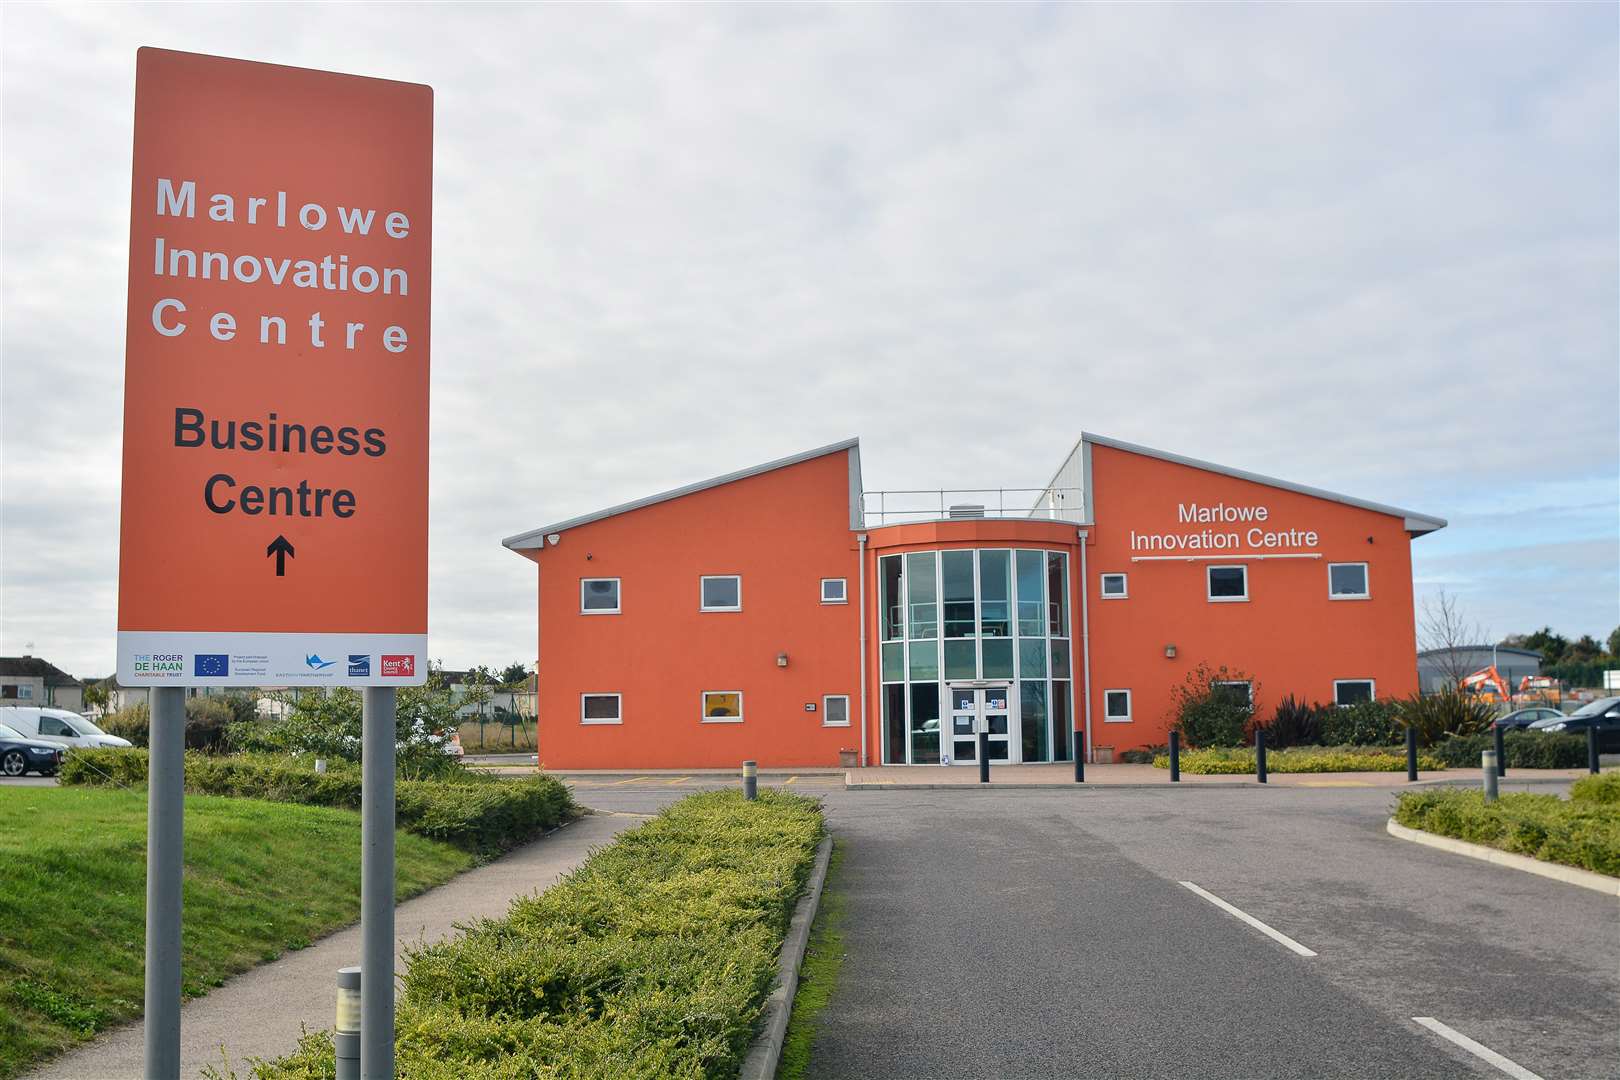 The Marlowe Innovation Centre has been helping small businesses with money from the fund